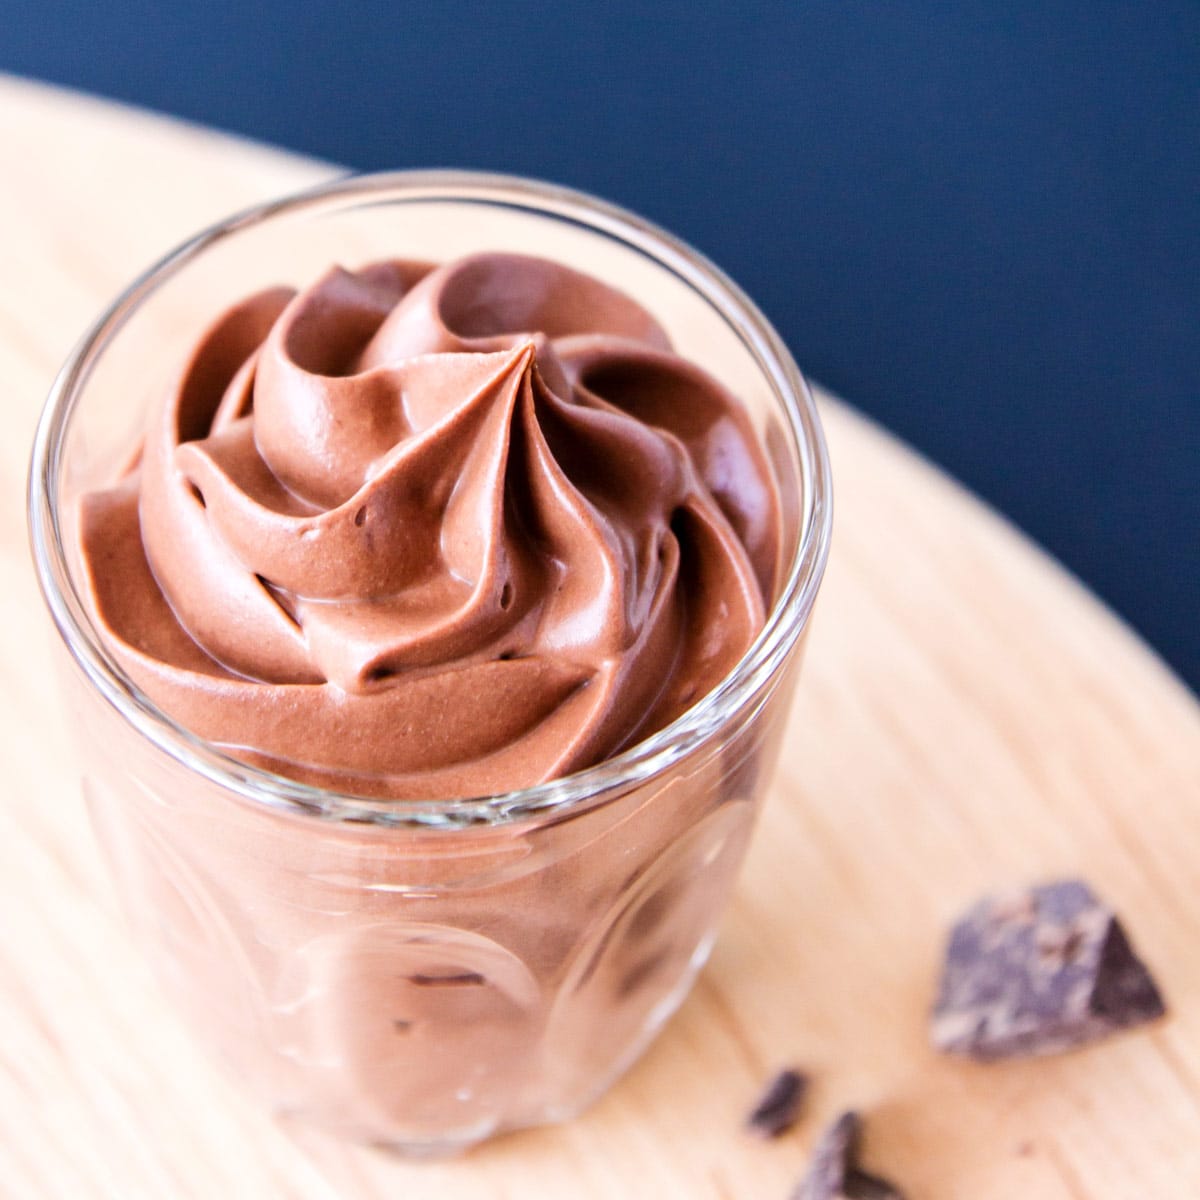 Mousse piped in a swirl in a small glass with chunks of chocolate scattered around.